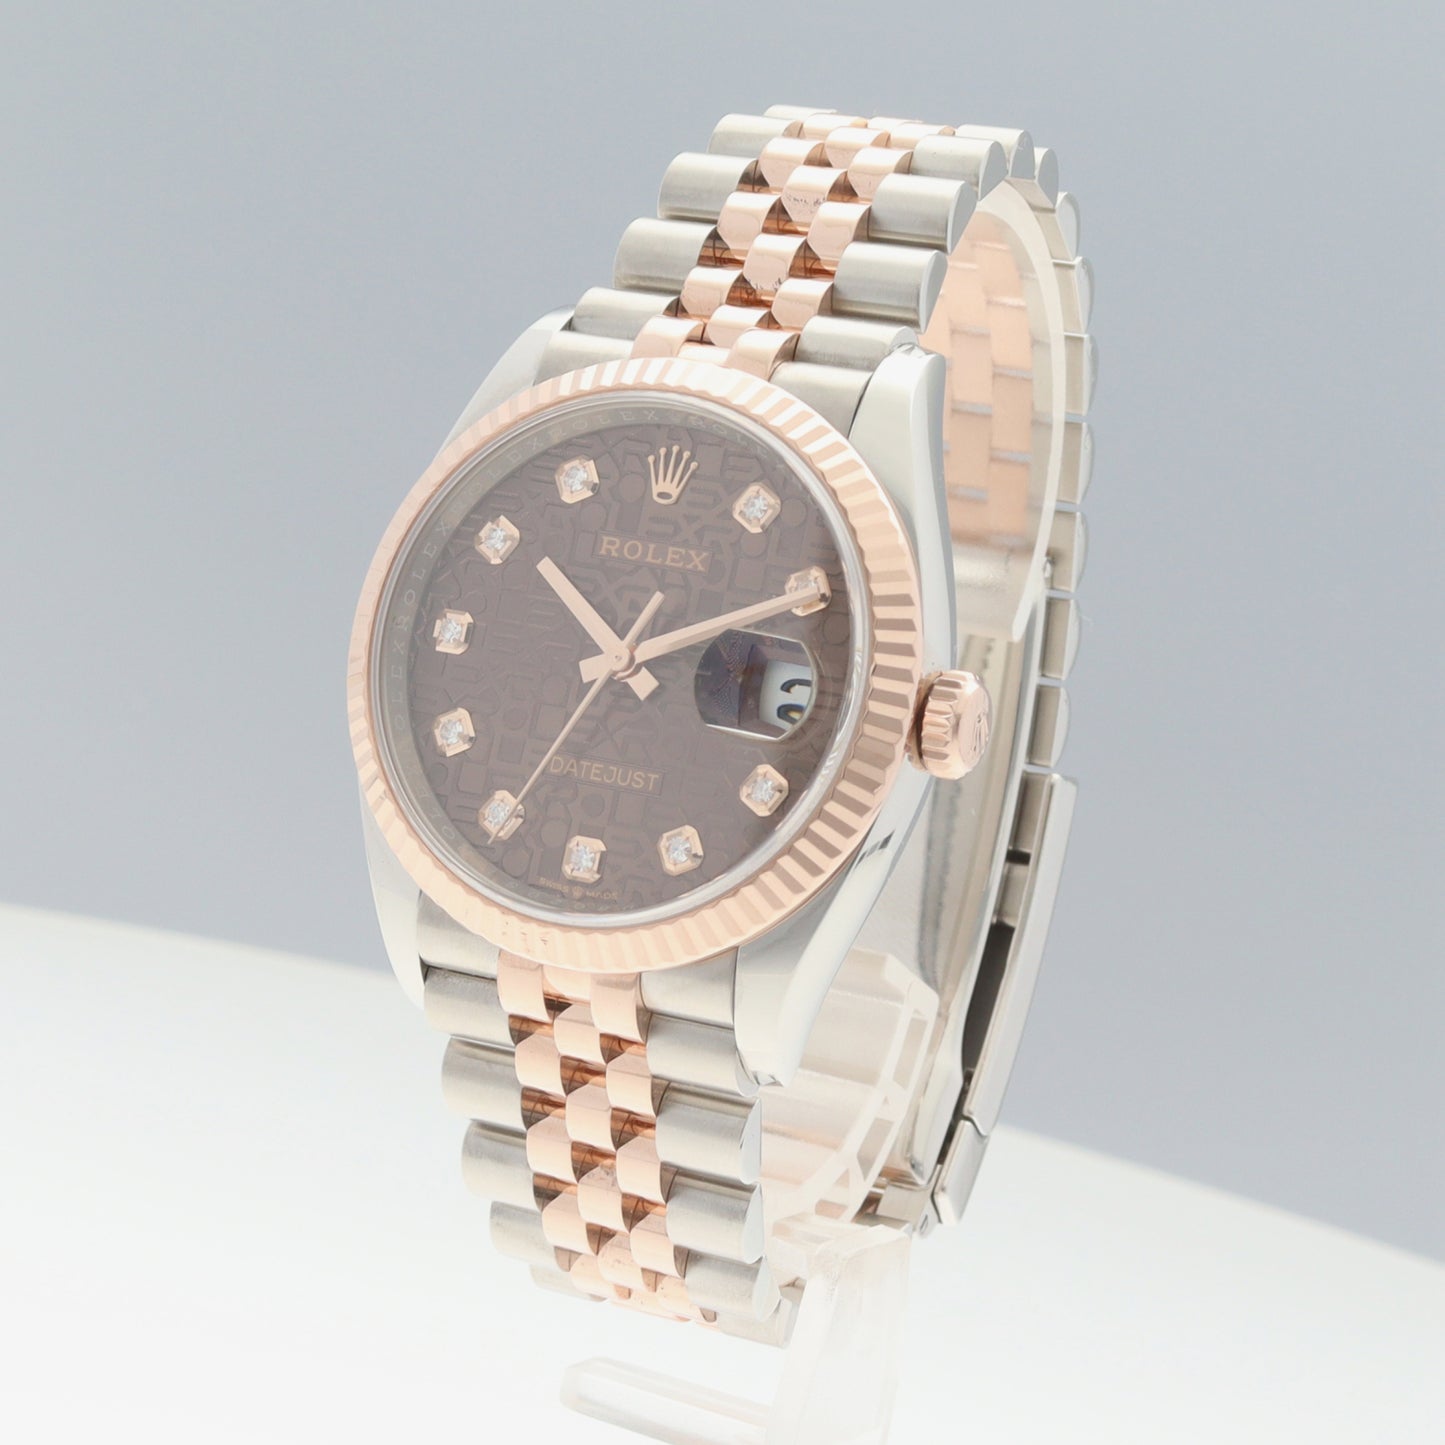 126231G　Datejust Computer5 Dial　2R-X01-01246